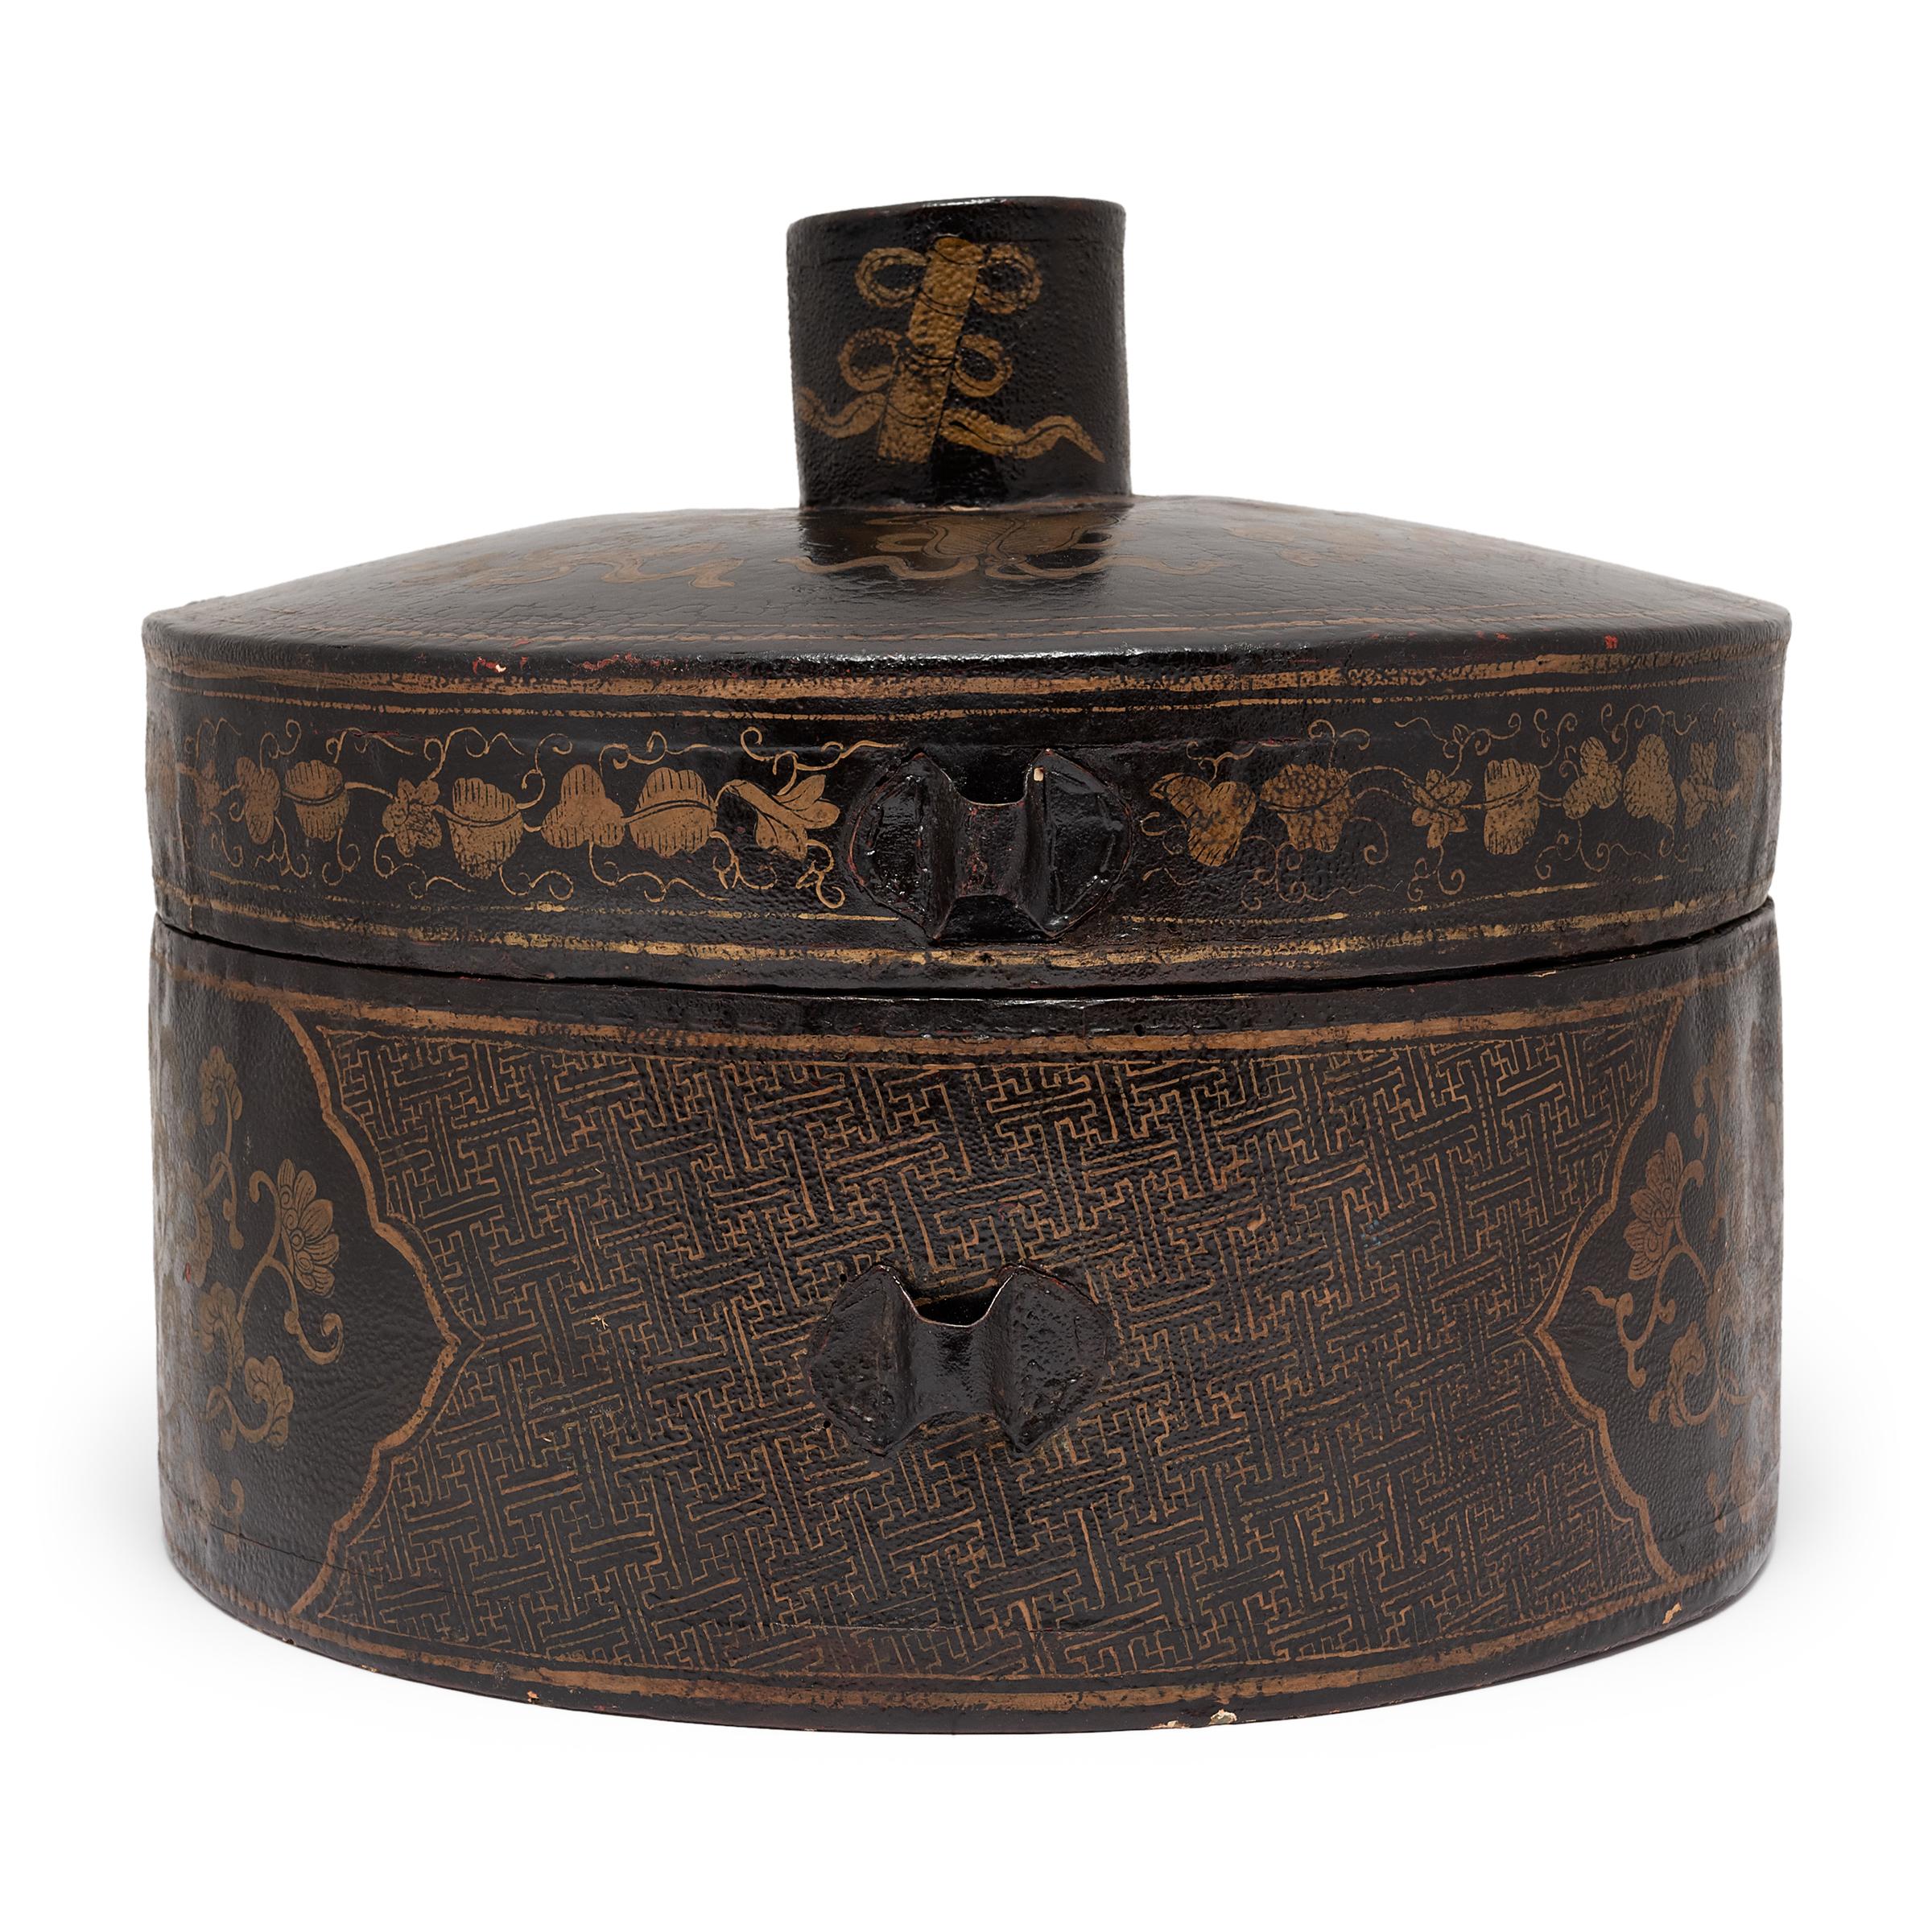 Hide Chinese Gilt Eight Immortals Hat Box, c. 1900